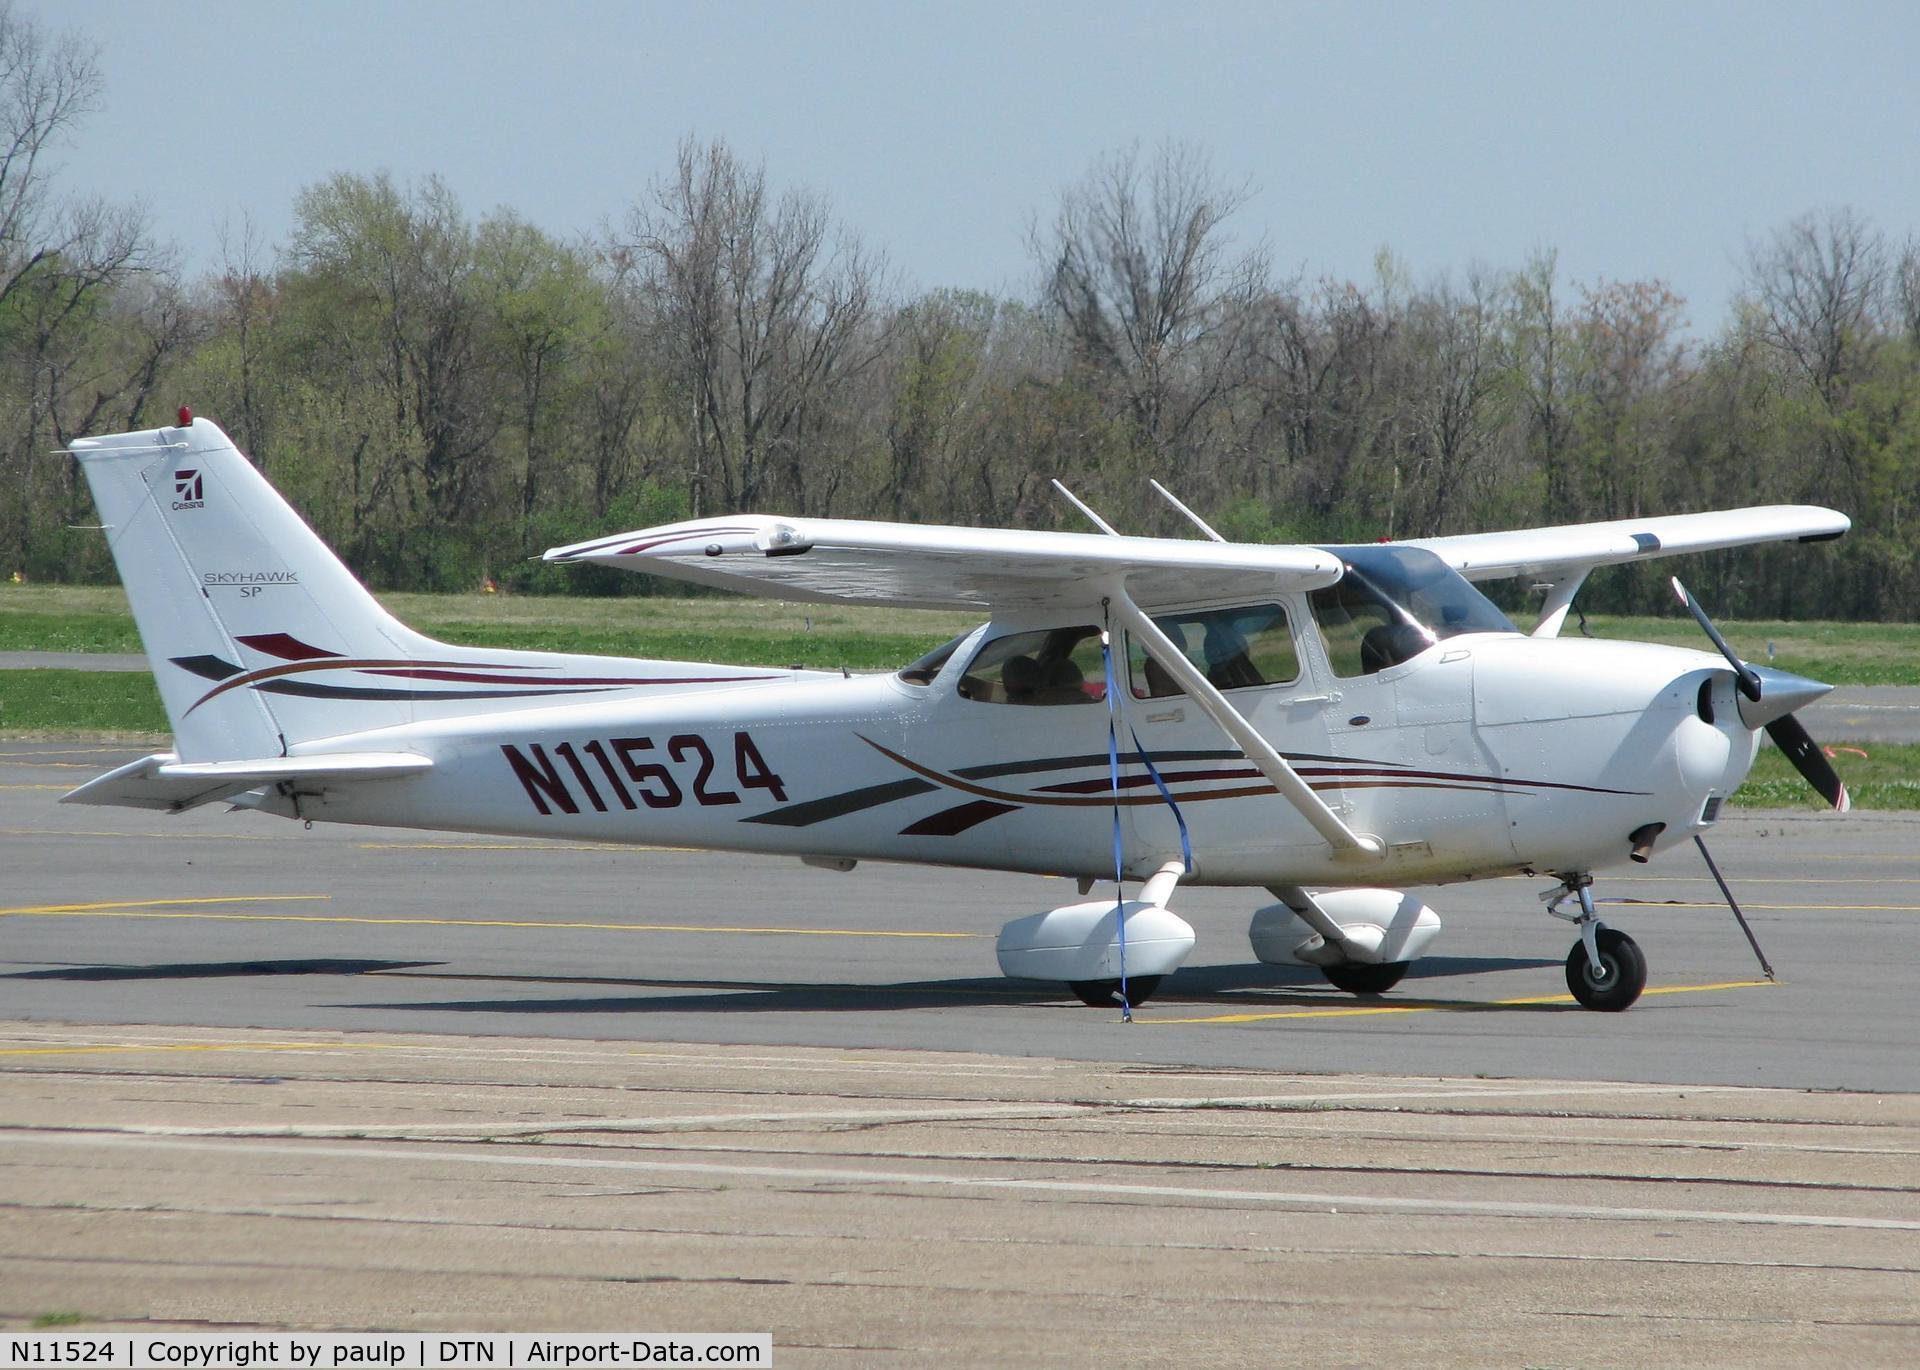 N11524, 2006 Cessna 172S C/N 172S10340, Parked at the Shreveport Downtown airport.